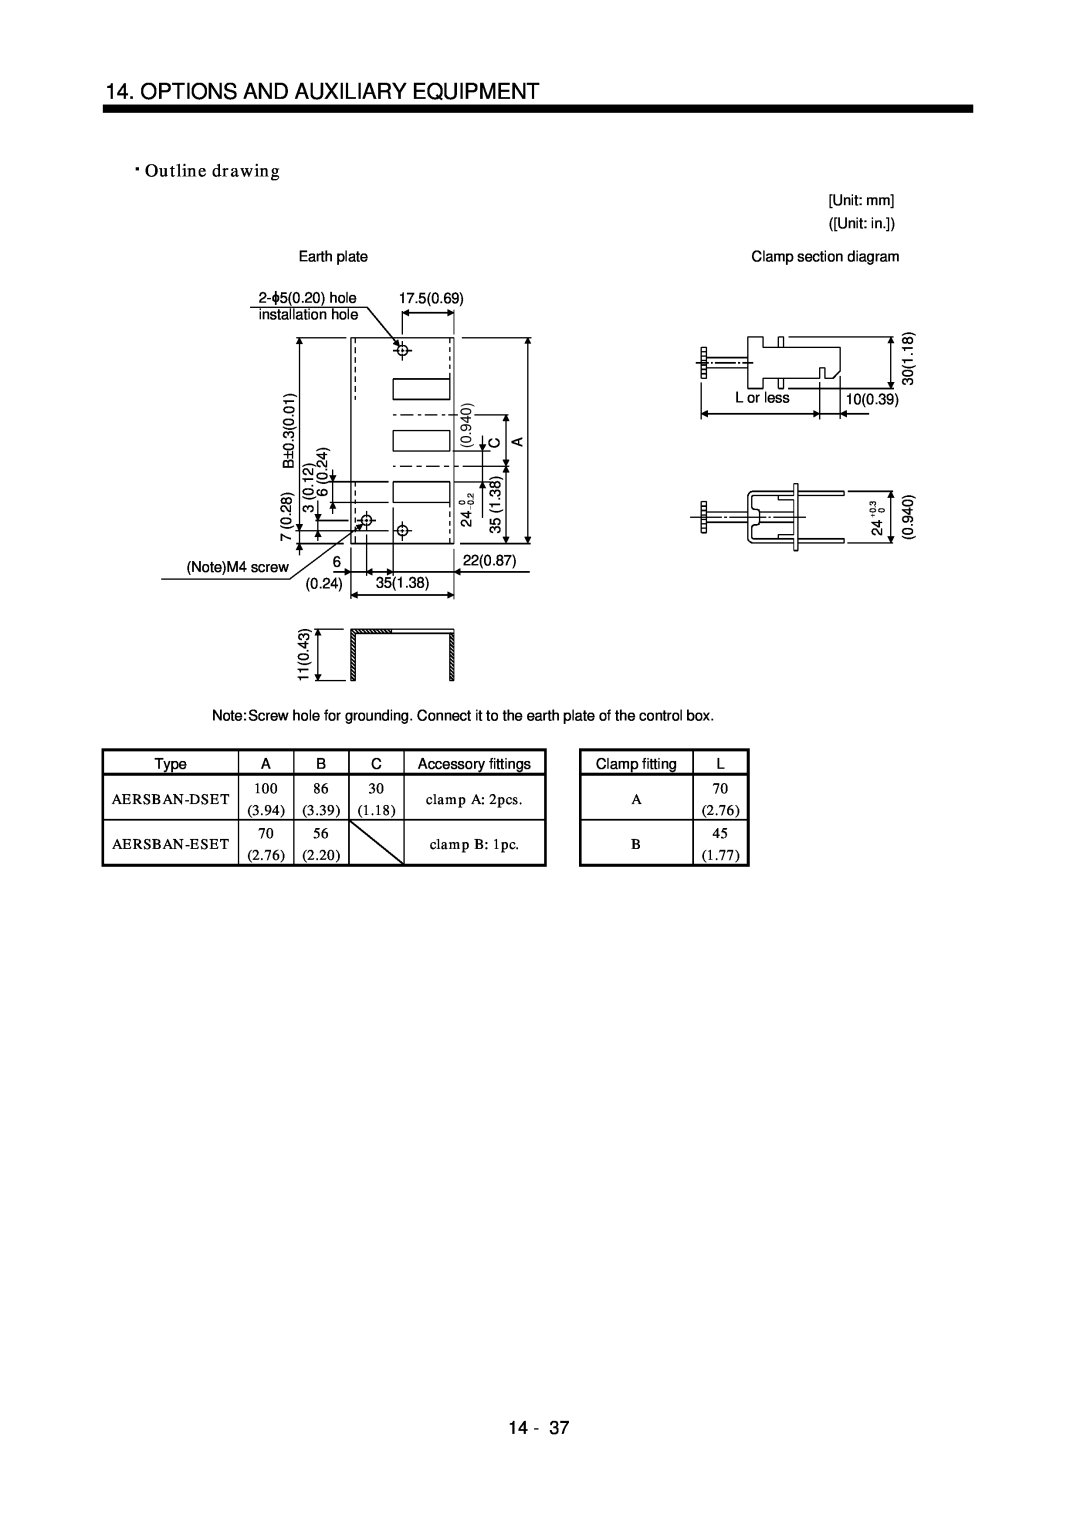 Mitsubishi Electronics MR-J2S- CL specifications Options And Auxiliary Equipment, Outline drawing, 14 